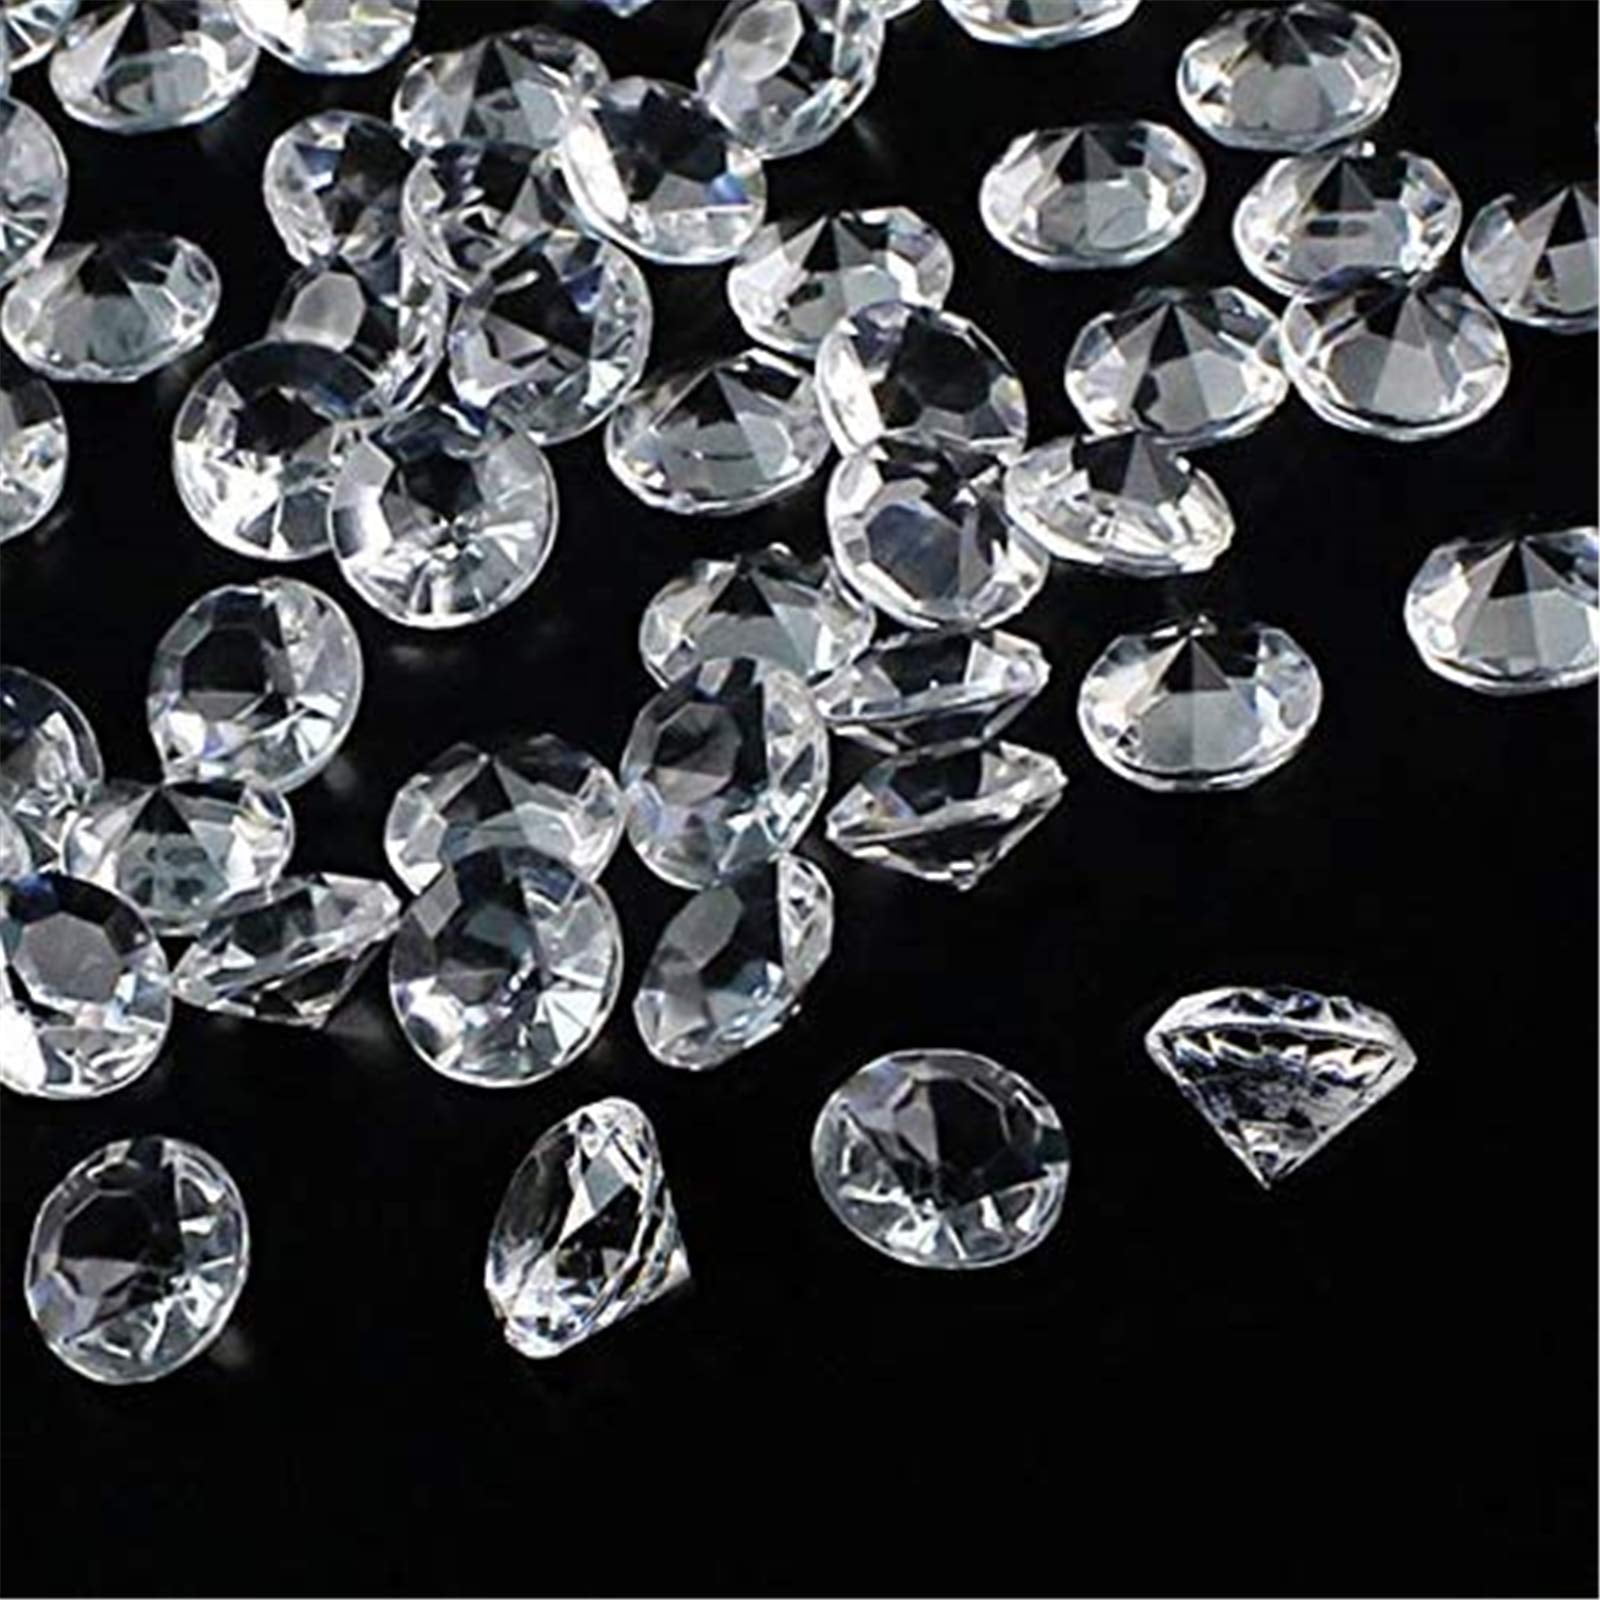 Wedding Event Vase Fillers Bridal Shower Clear White Arts & Crafts and more Honbay 100PCS 20mm Acrylic Faux Diamond Crystal Treasure Gems for Table Scatters Birthday Decoration Favor 